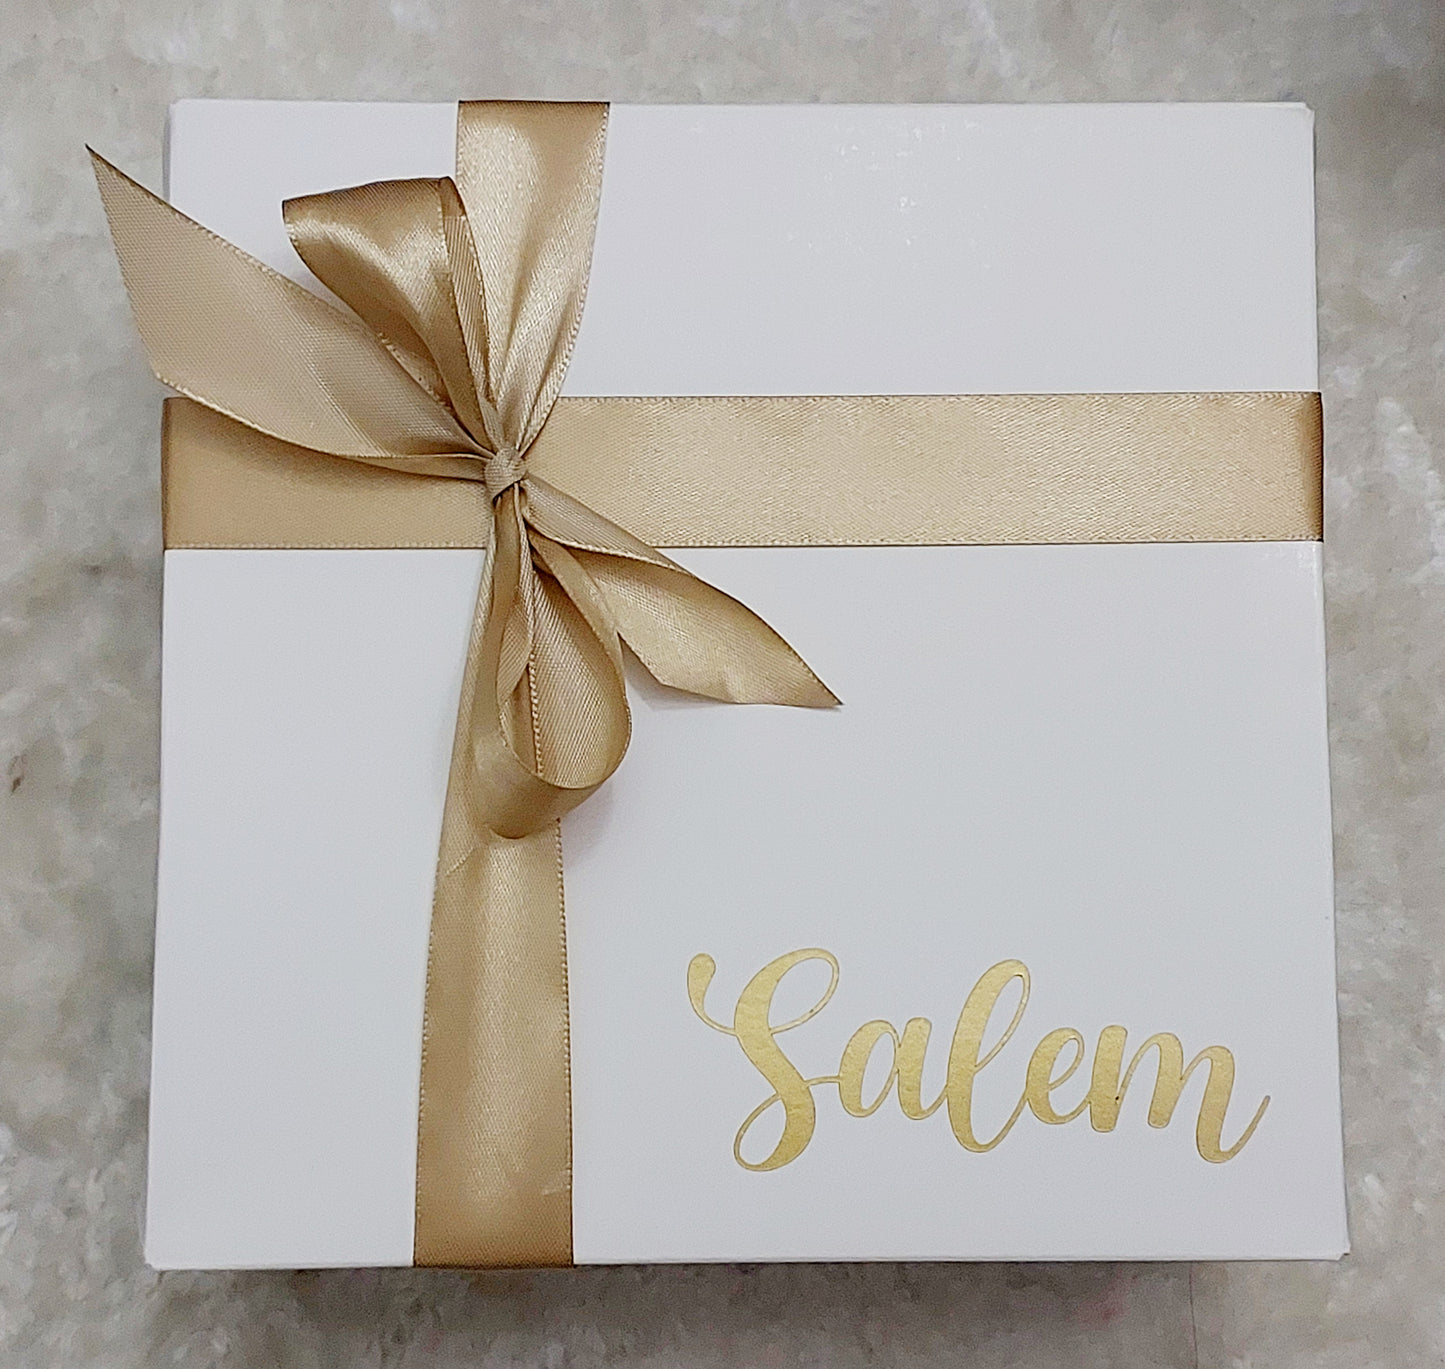 GIFT BOX - PUT MY ORDER IN A BOX PERSONALIZED WITH A NAME